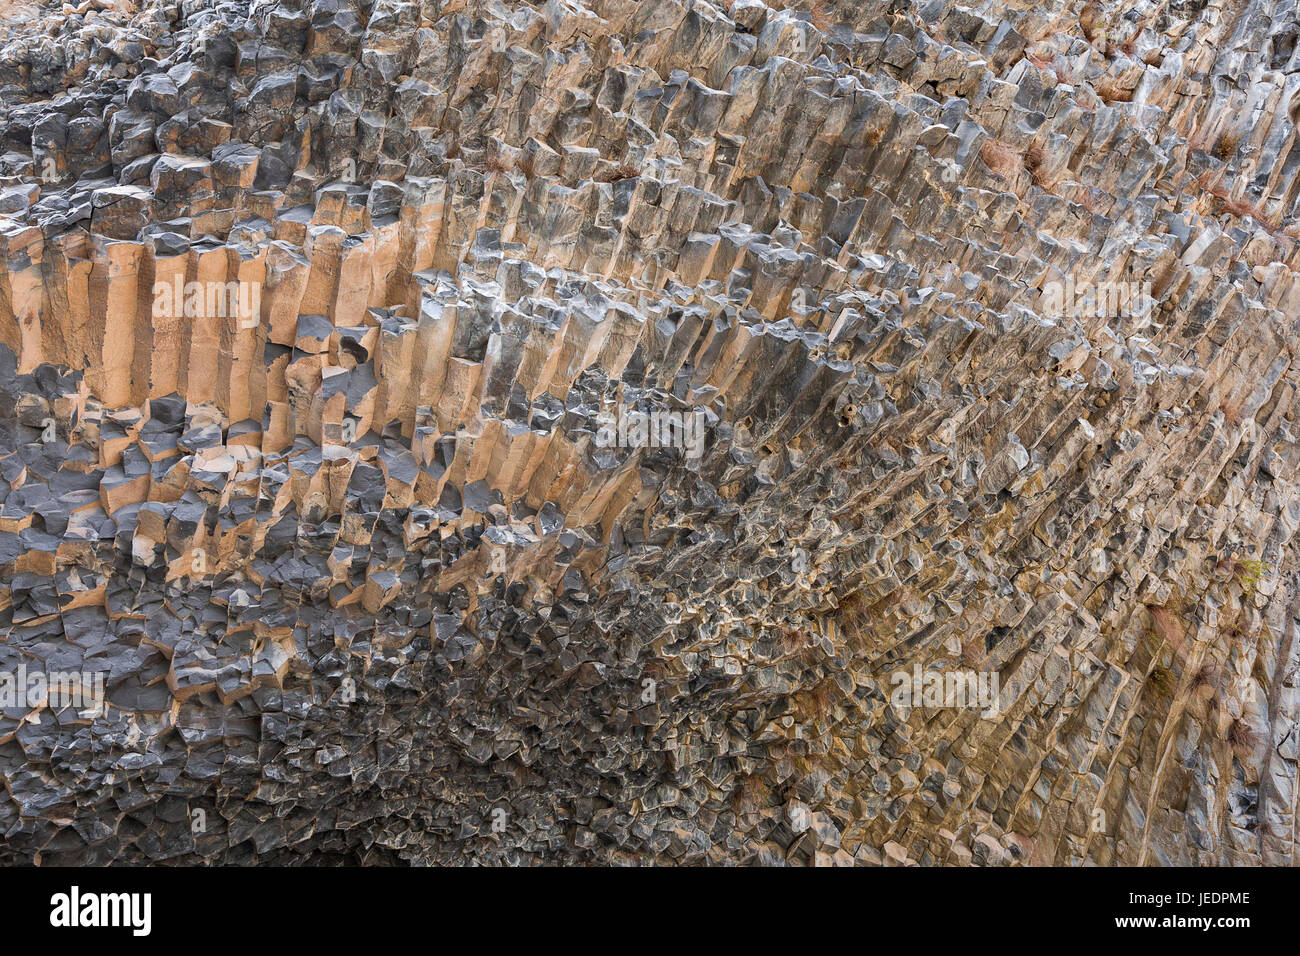 Basalt rock formations known as Symphony of Stones in Armenia. Stock Photo